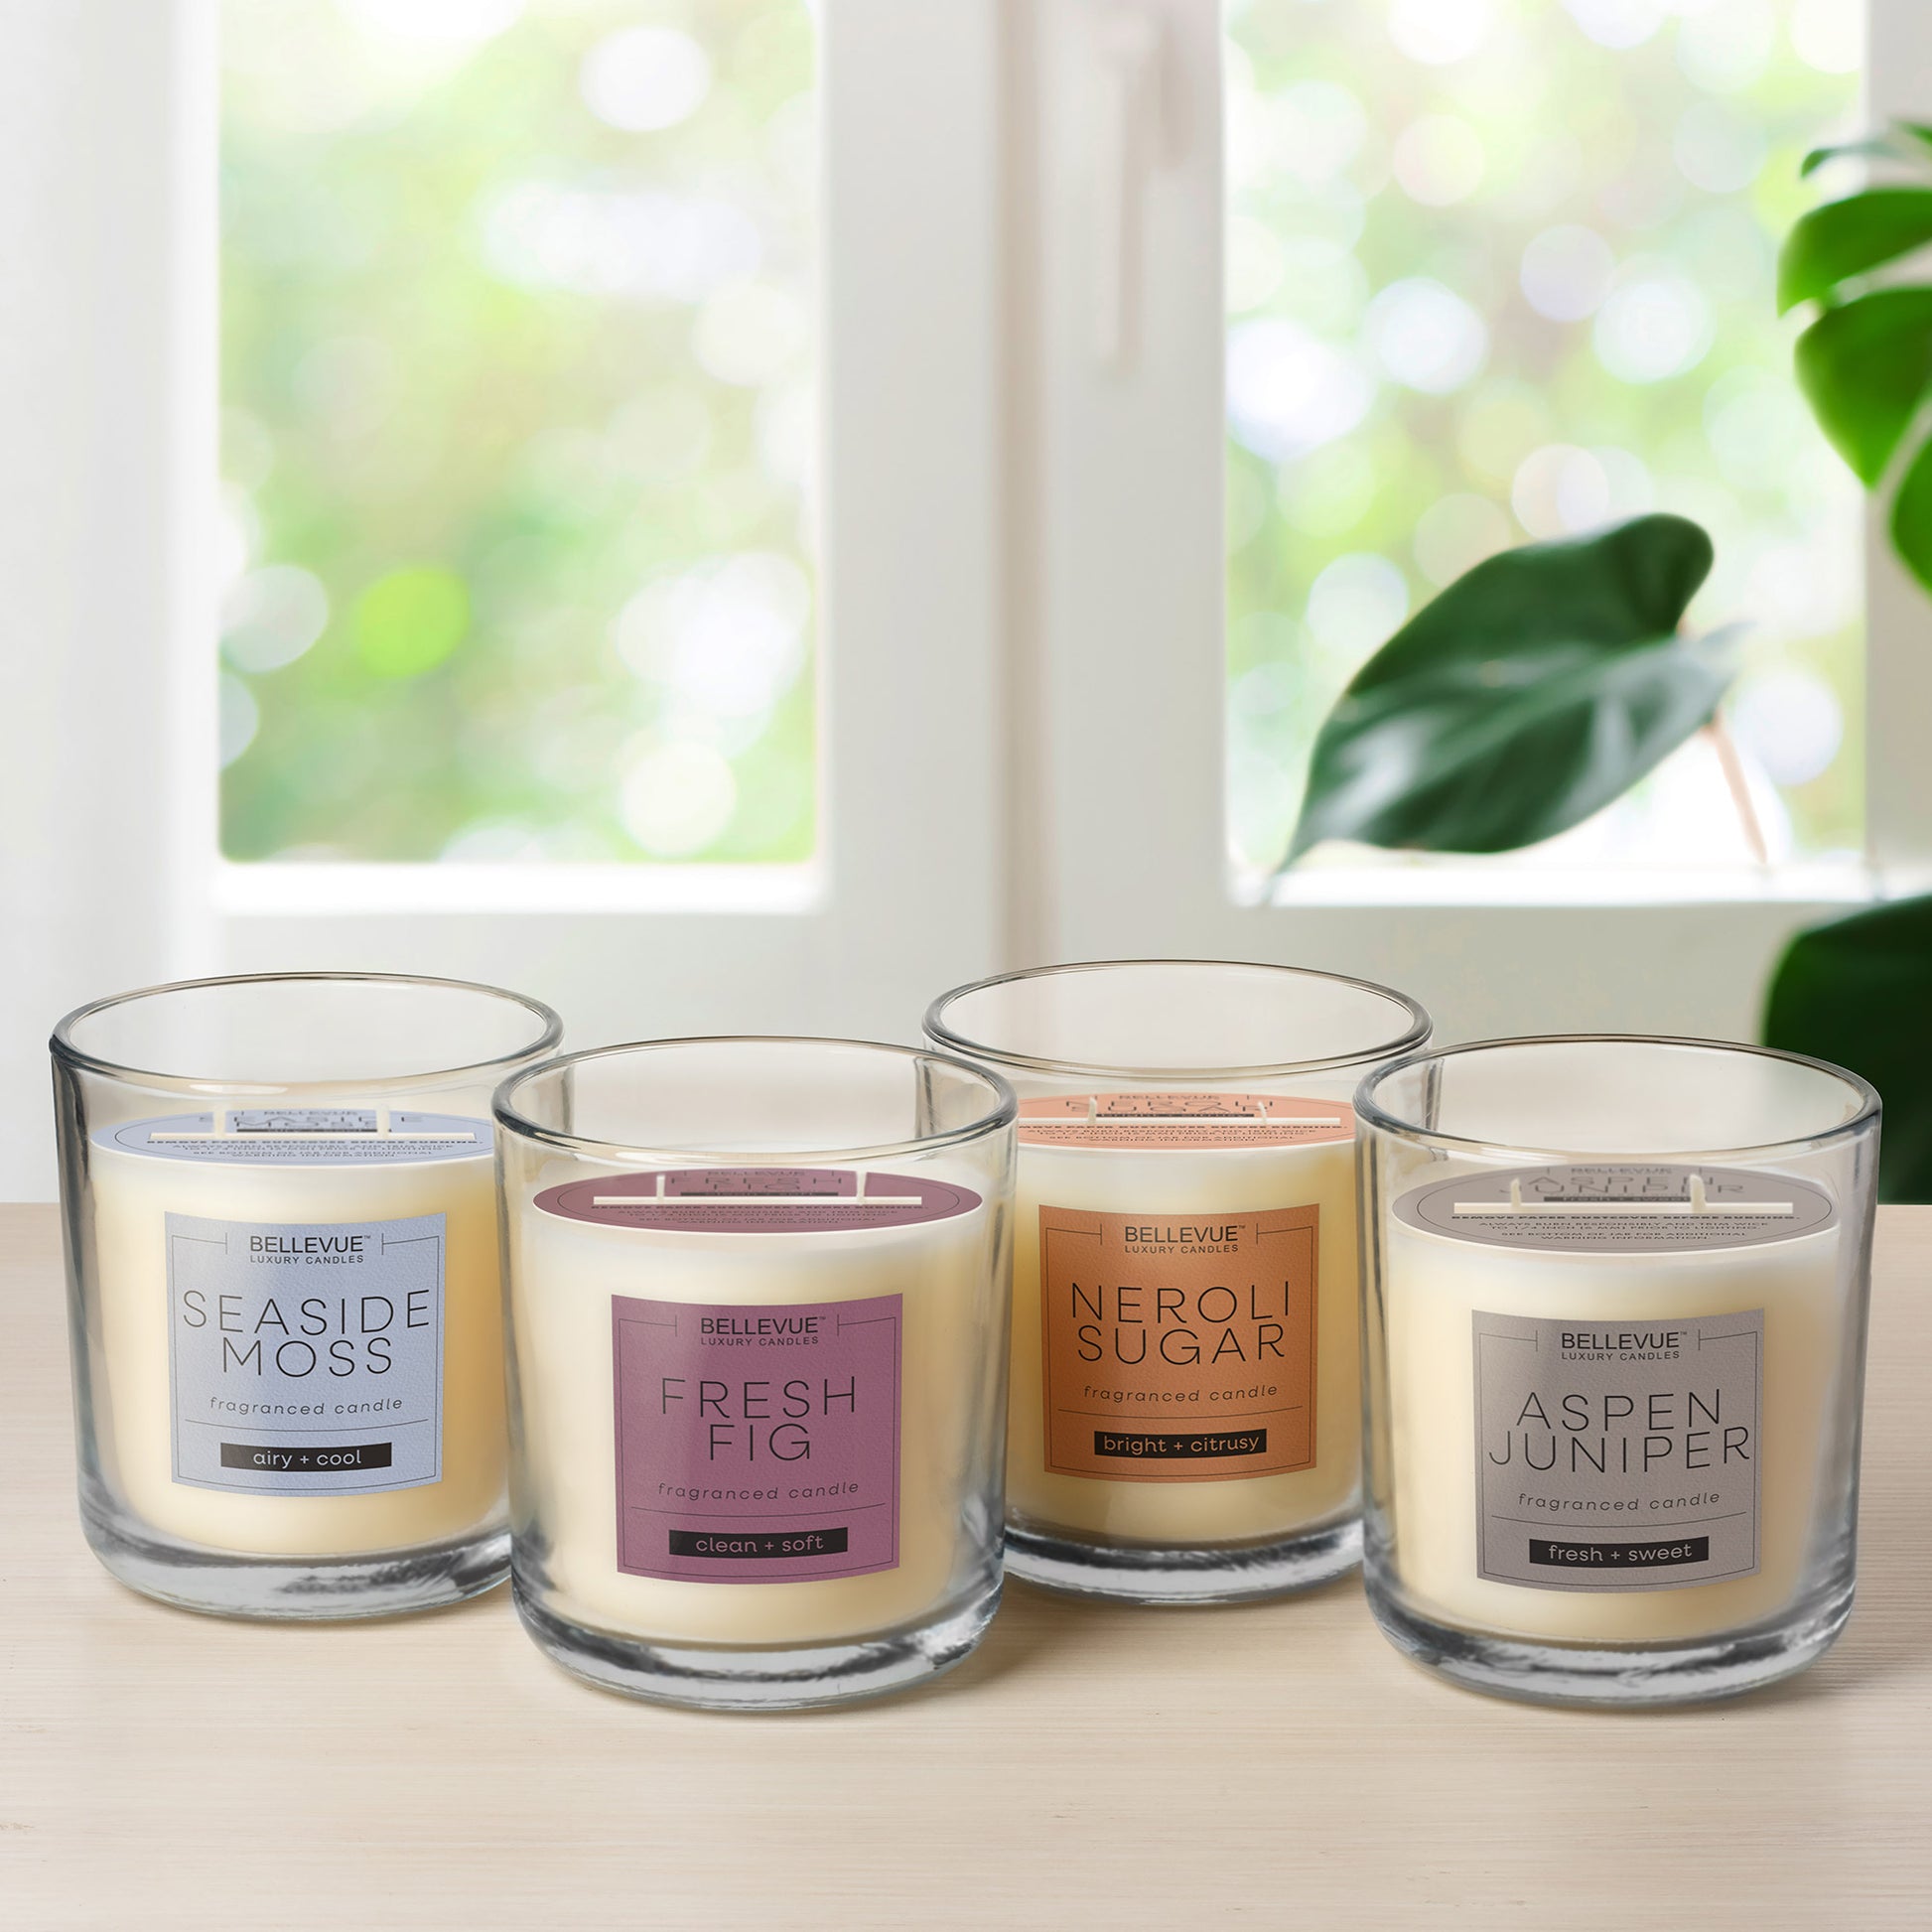 Luxury Candles, 11Oz, 4-Pack, Soy Blend Candles